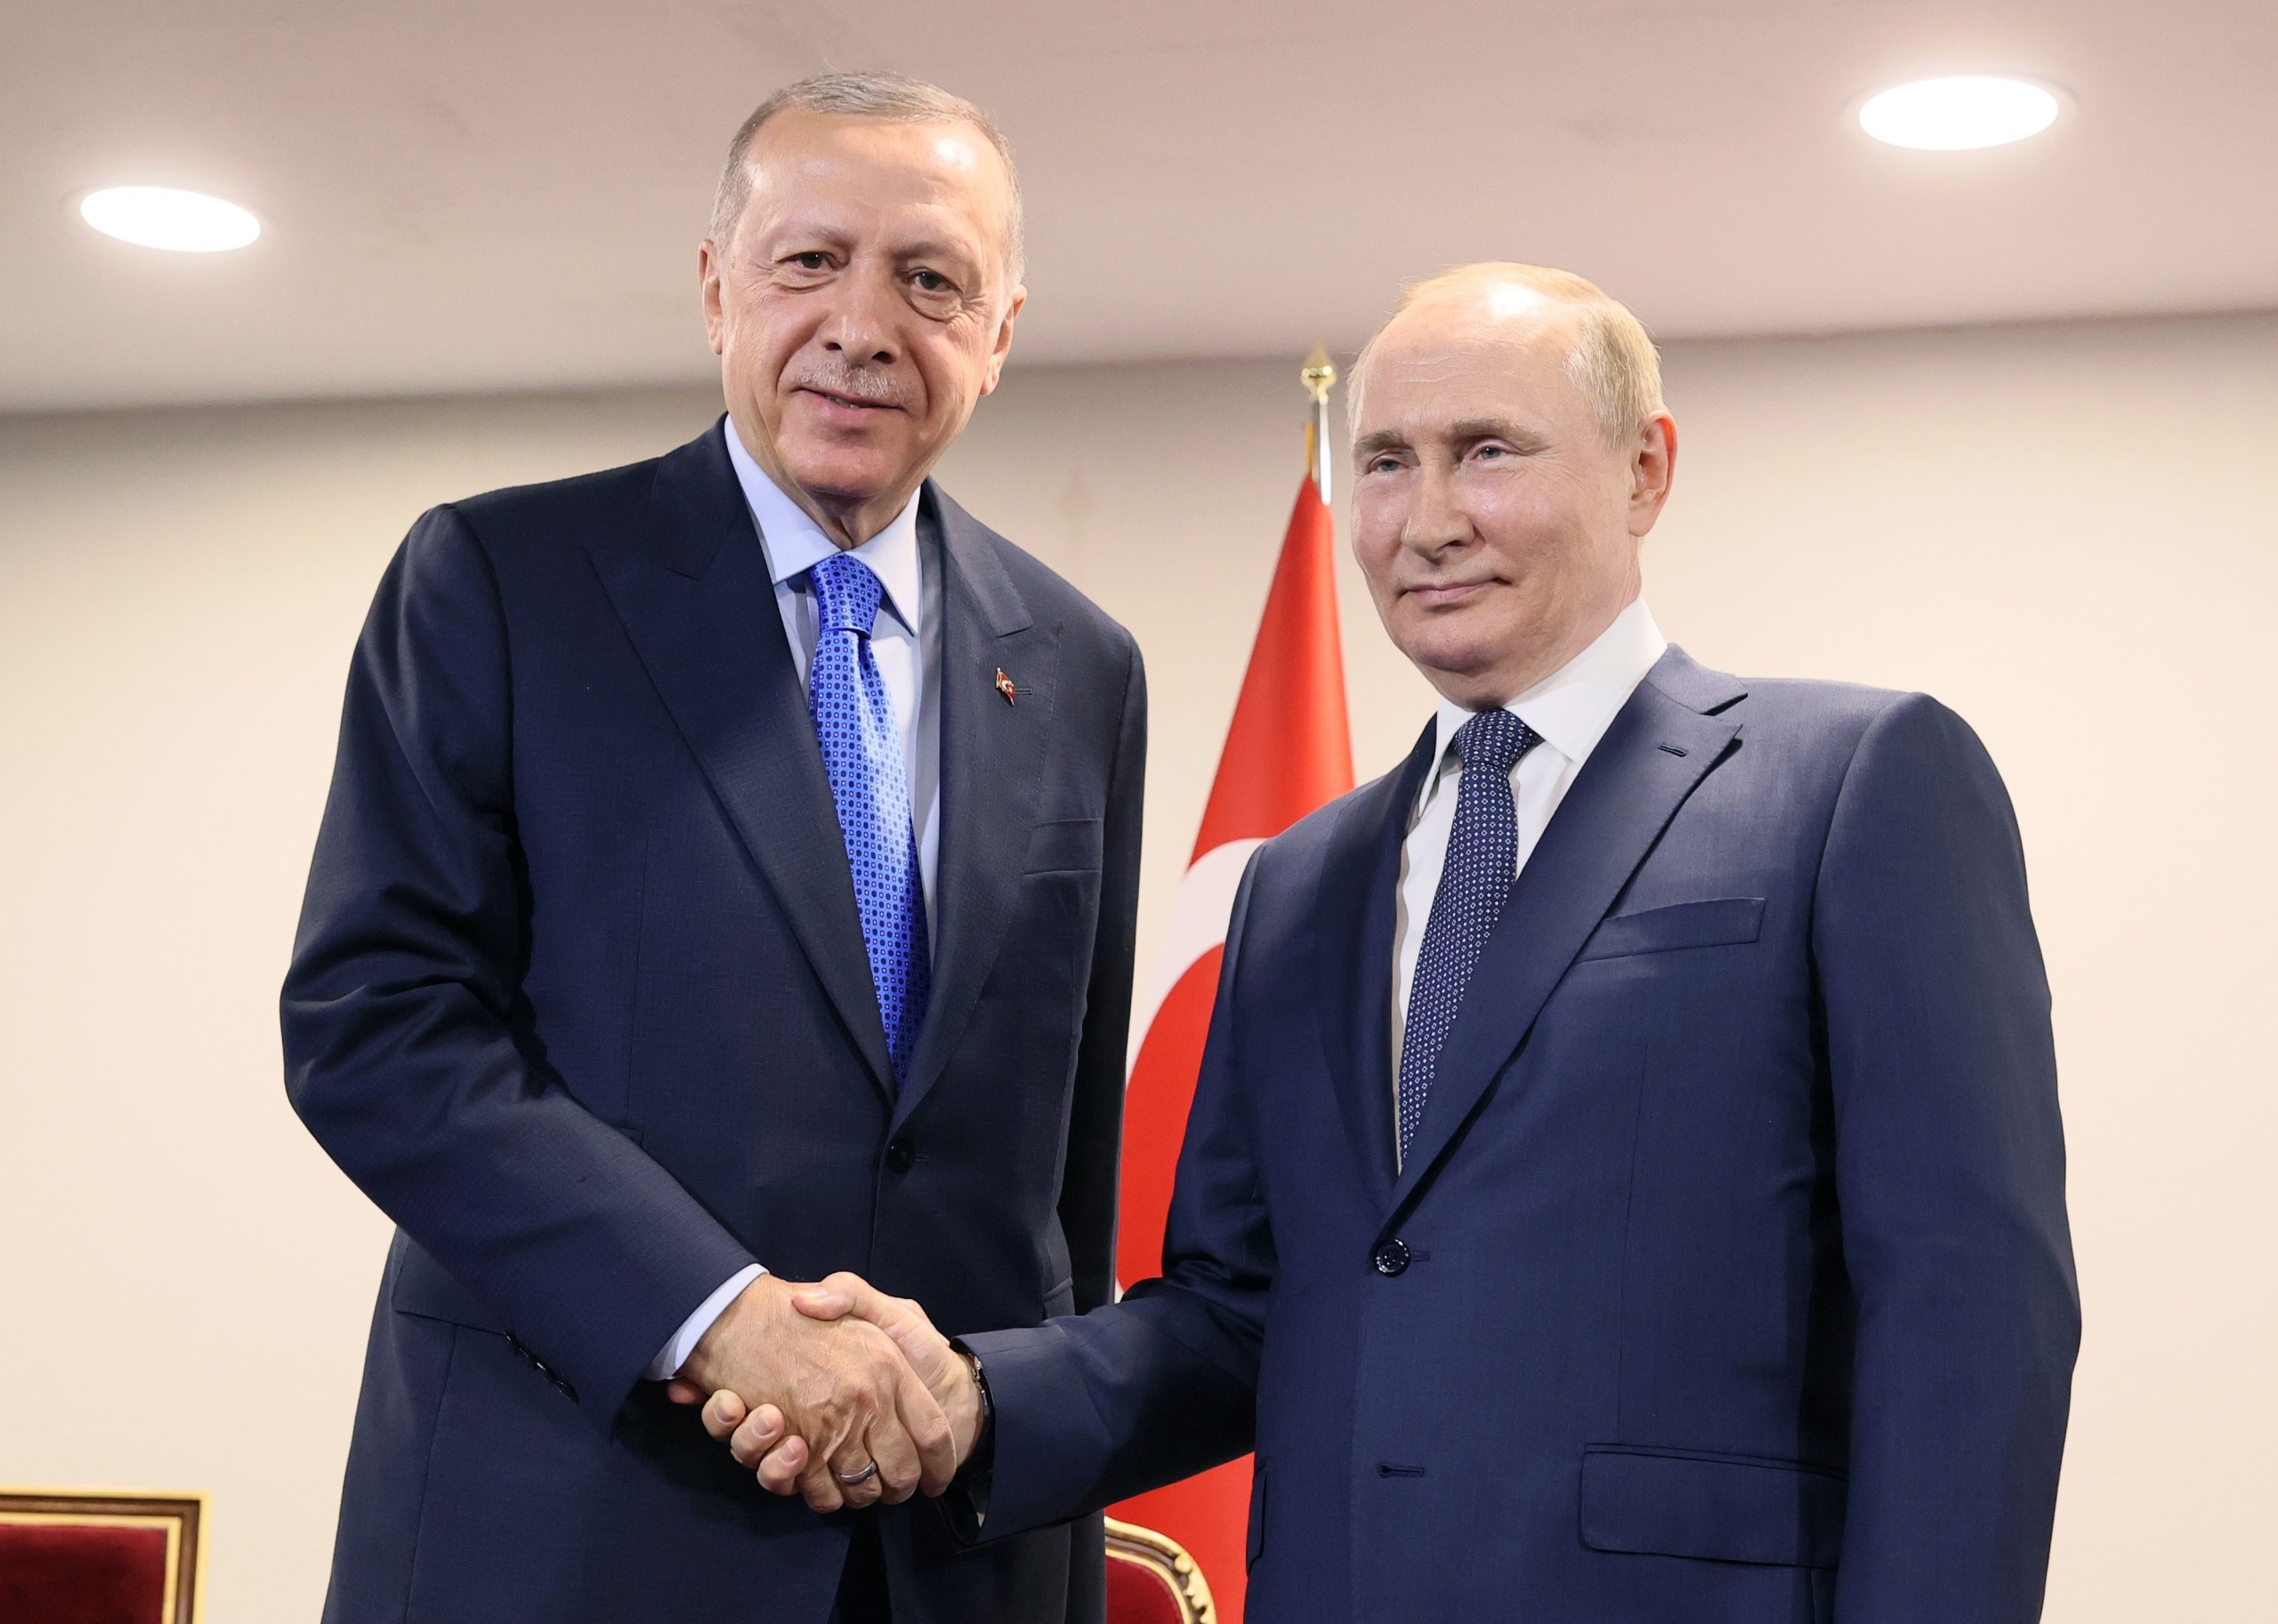 epa10080223 Turkish President Recep Tayyip Erdogan (L) and Russian President Vladimir Putin (R) shake hands during a meeting in Tehran, Iran, 19 July 2022. Russian President is on a working visit in Iran to take part in a summit grouping leaders of Iran, Turkey, and Russia and to have bilateral meetings with the leaders of Iran and Turkey.  EPA/SERGEI SAVOSTYANOV / KREMLIN POOL / SPUTNIK / POOL MANDATORY CREDIT